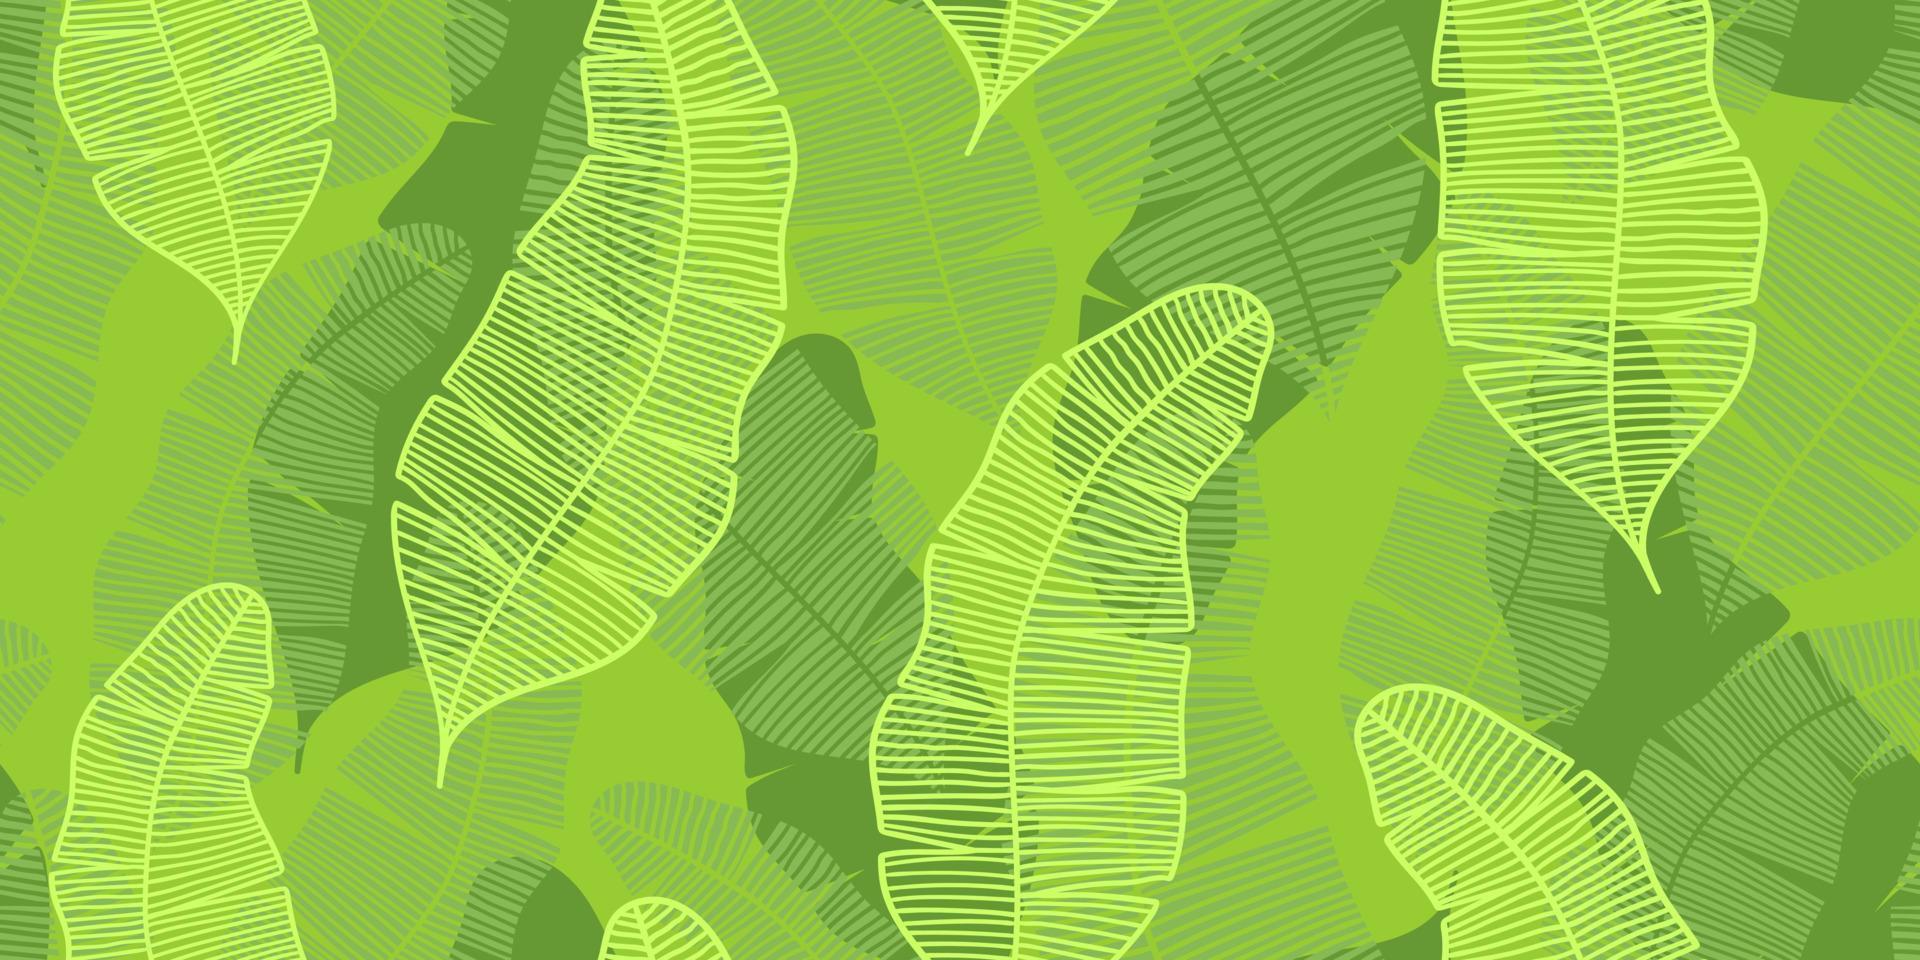 ABSTRACT VECTOR SEAMLESS LIGHT GREEN BANNER WITH GREEN BANANA LEAVES